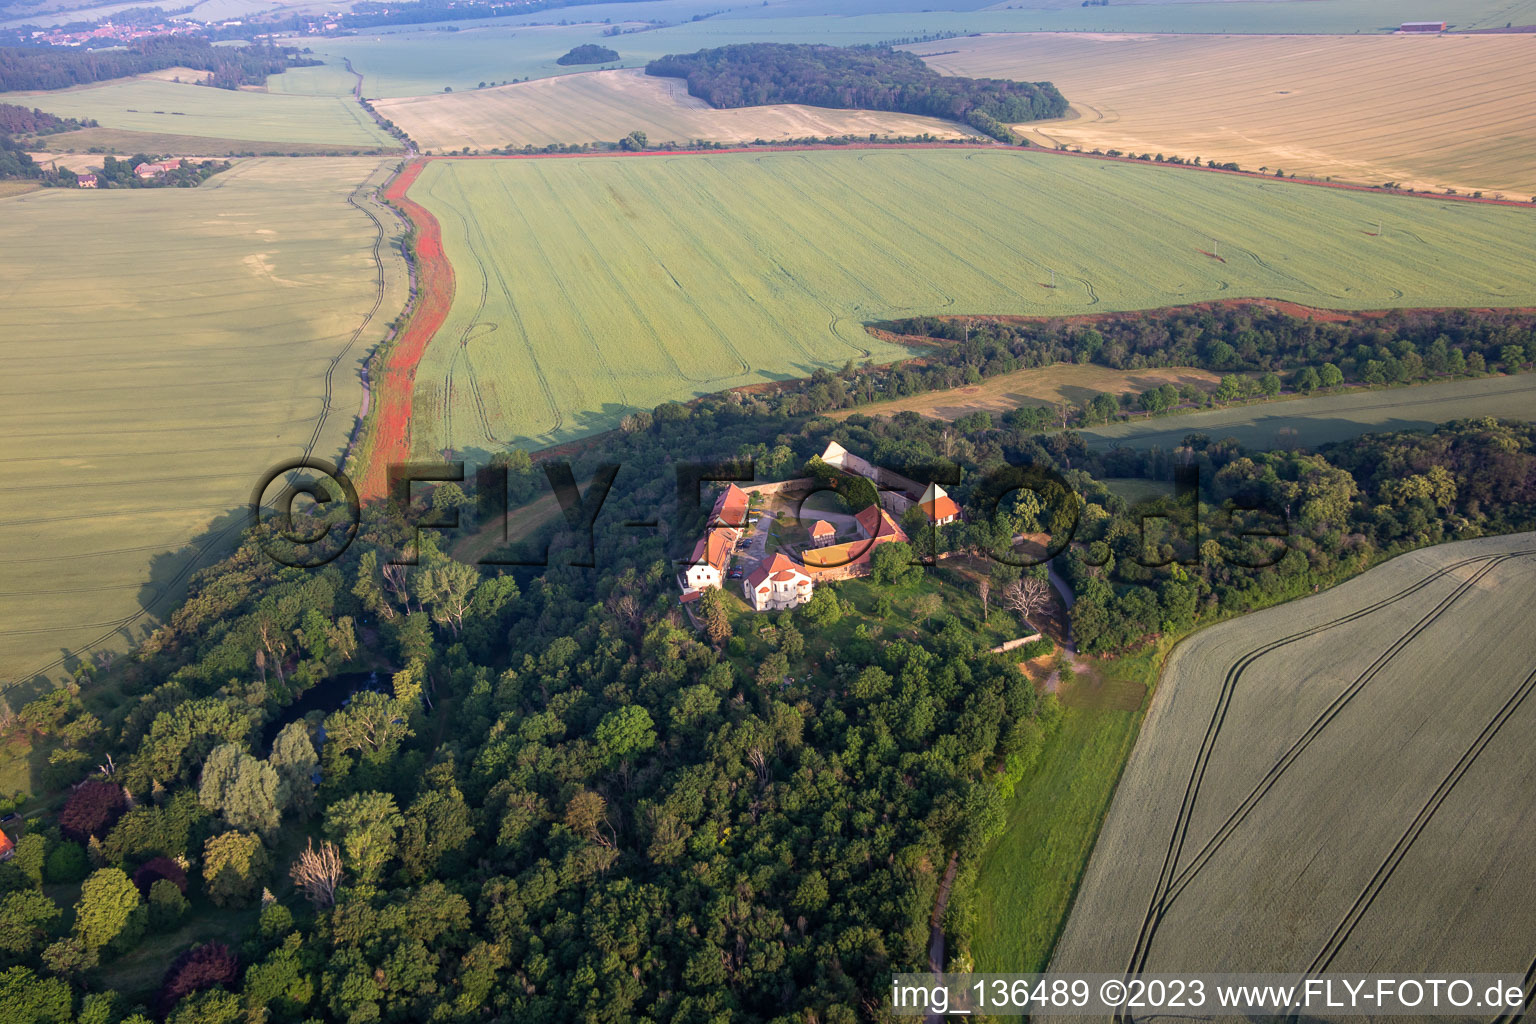 Konradsburg in the district Ermsleben in Falkenstein in the state Saxony-Anhalt, Germany seen from above